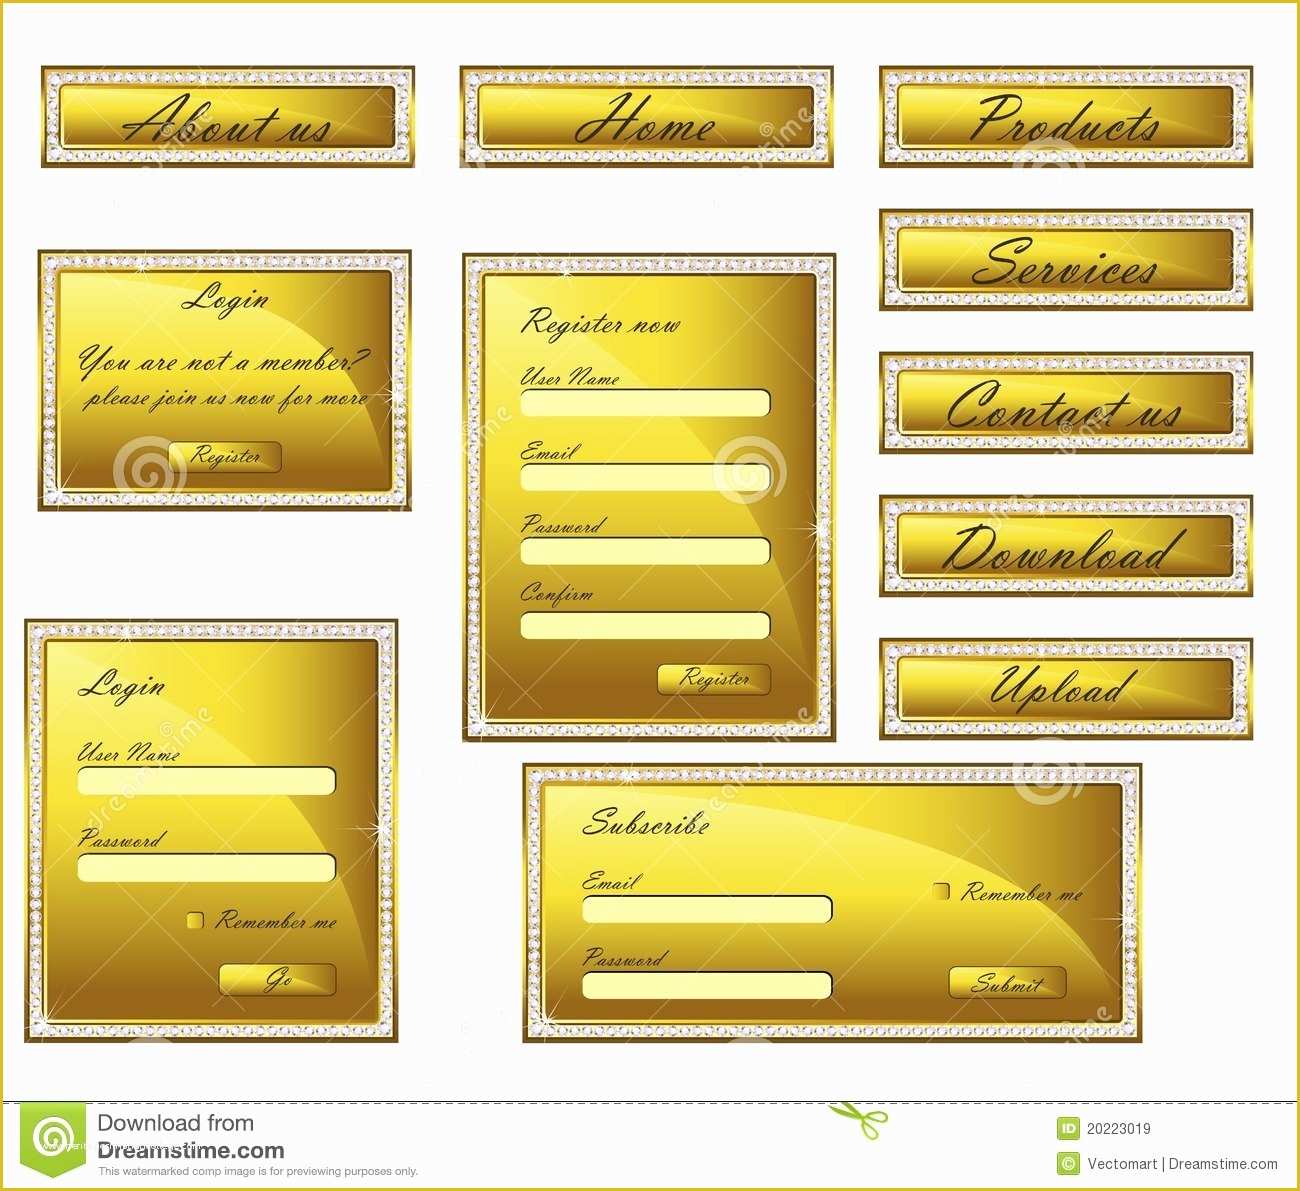 Copyright Free Website Templates Of Web Template Royalty Free Stock Image